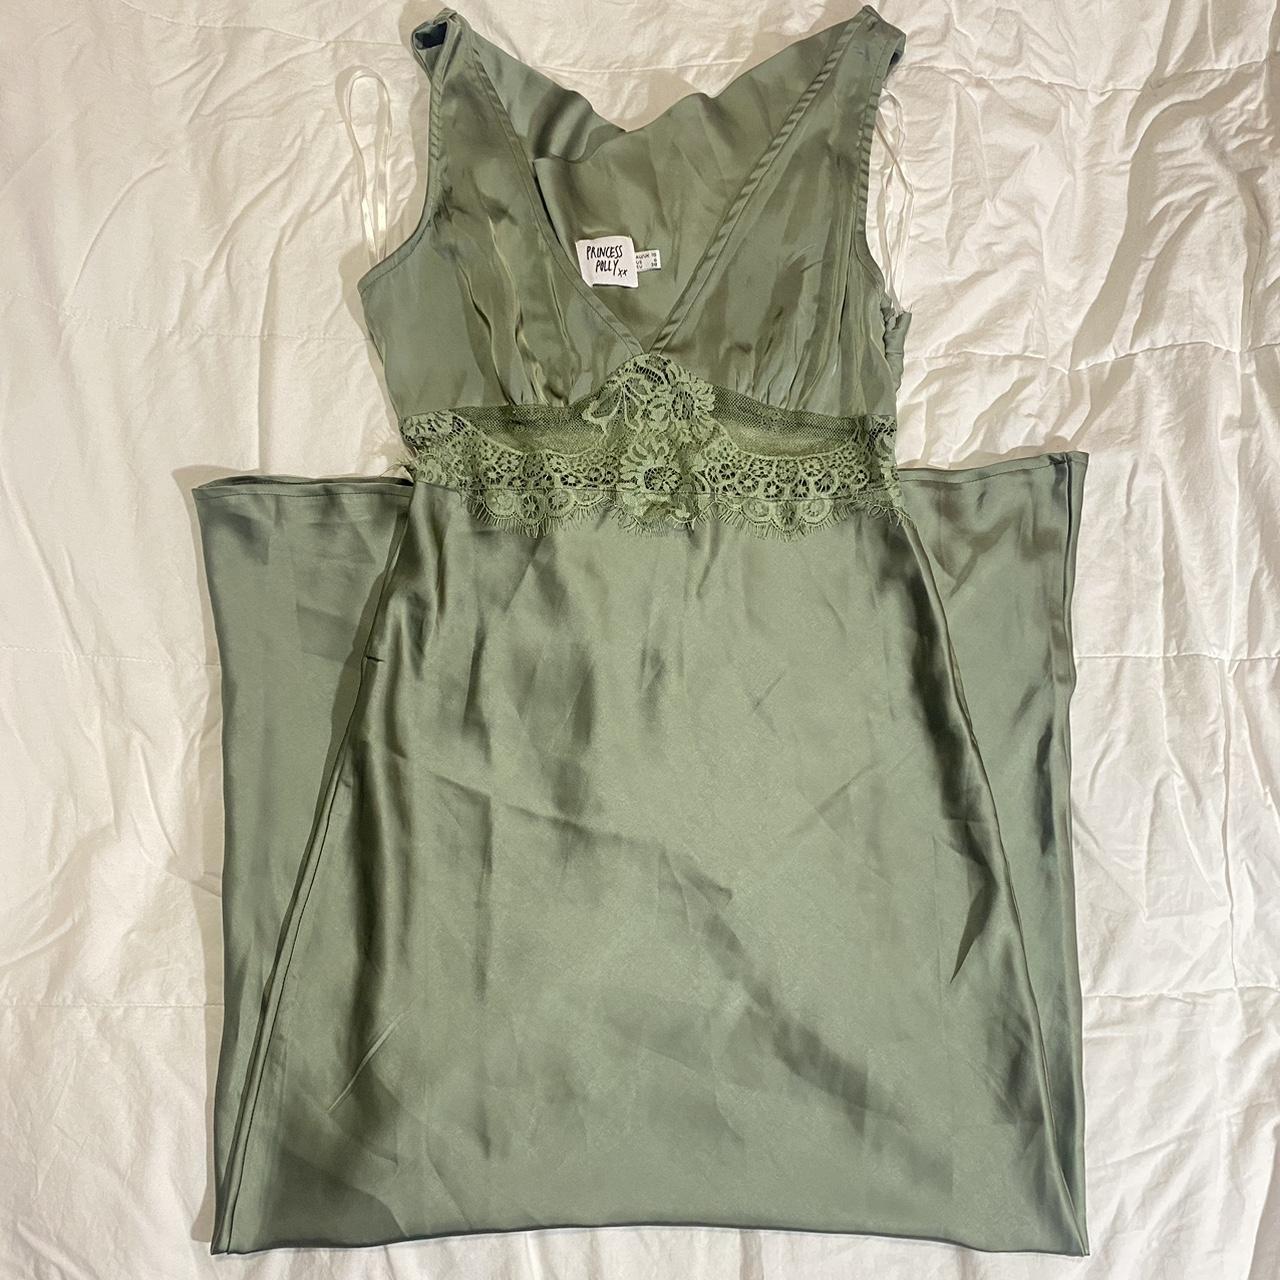 Satin sage green maxi dress. The lace is slightly... - Depop